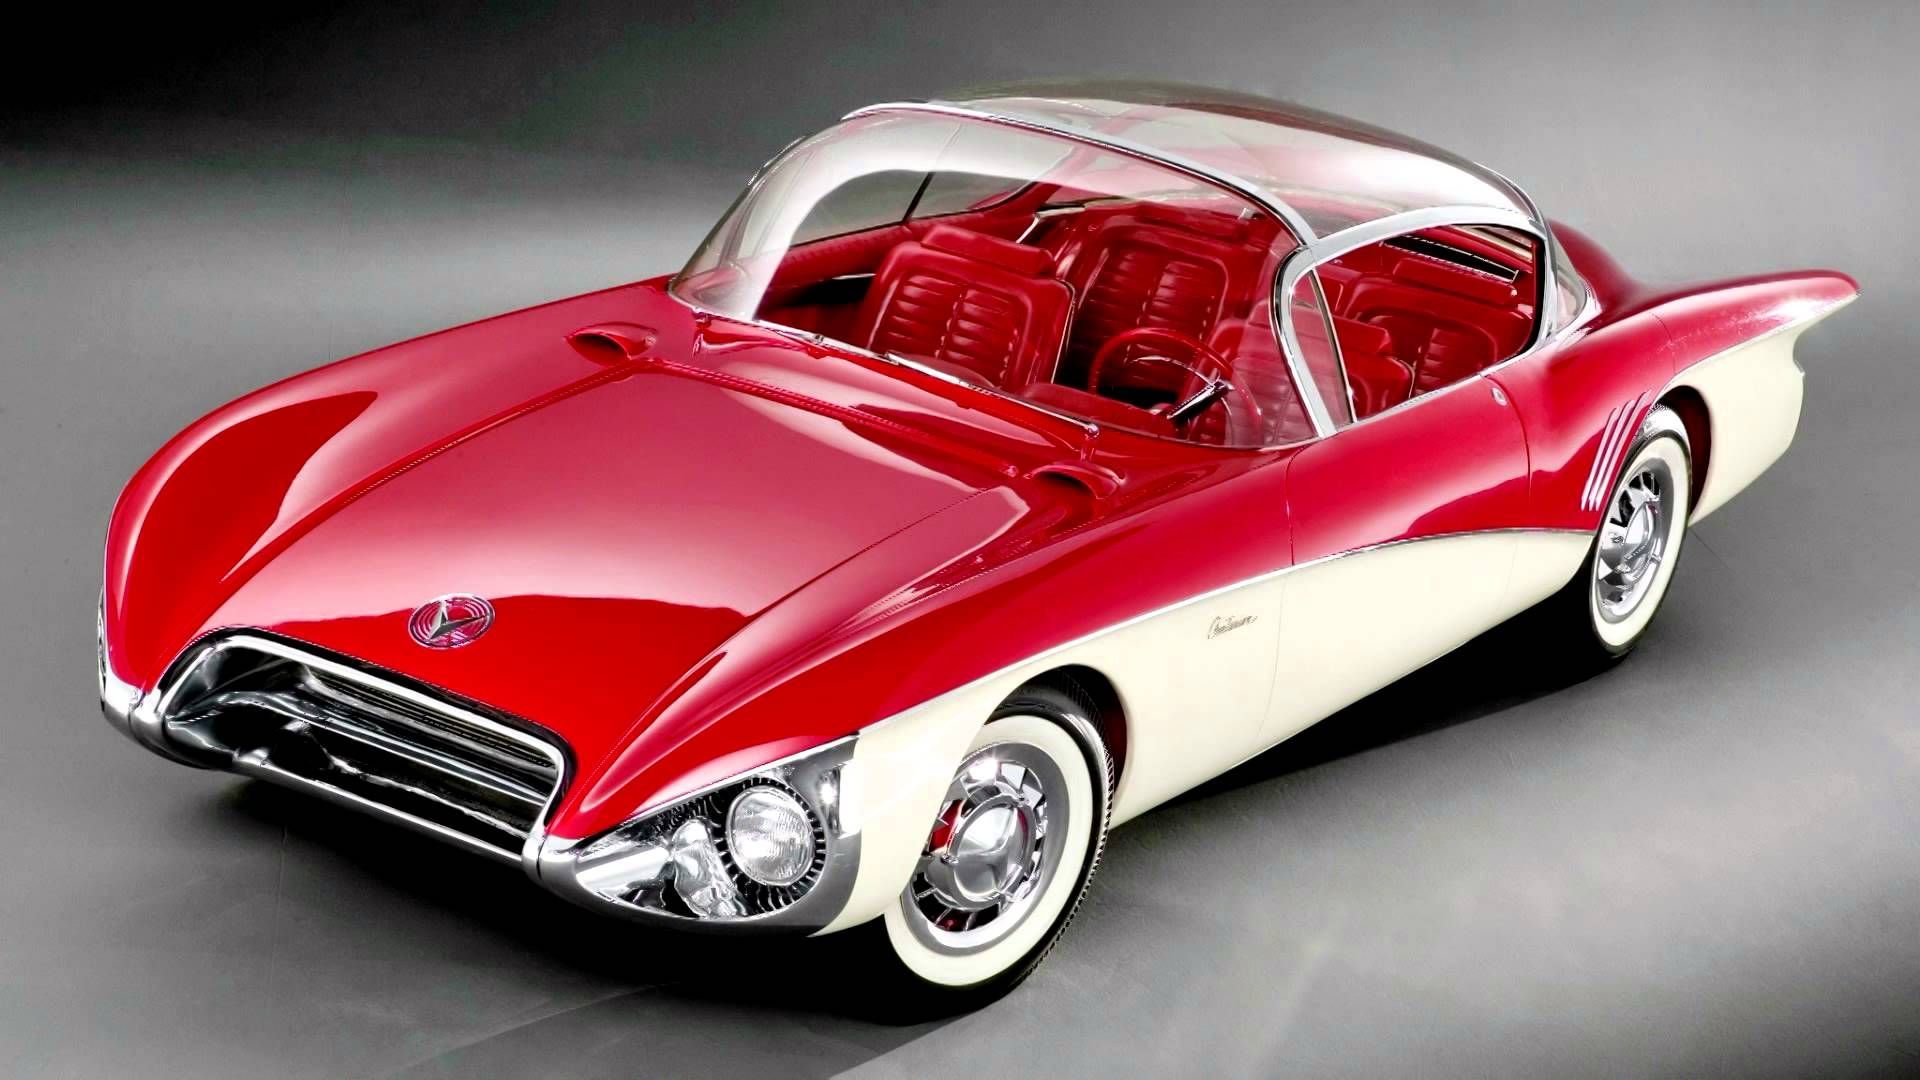 1956 Buick Centurion Concept Car from above on gray floor